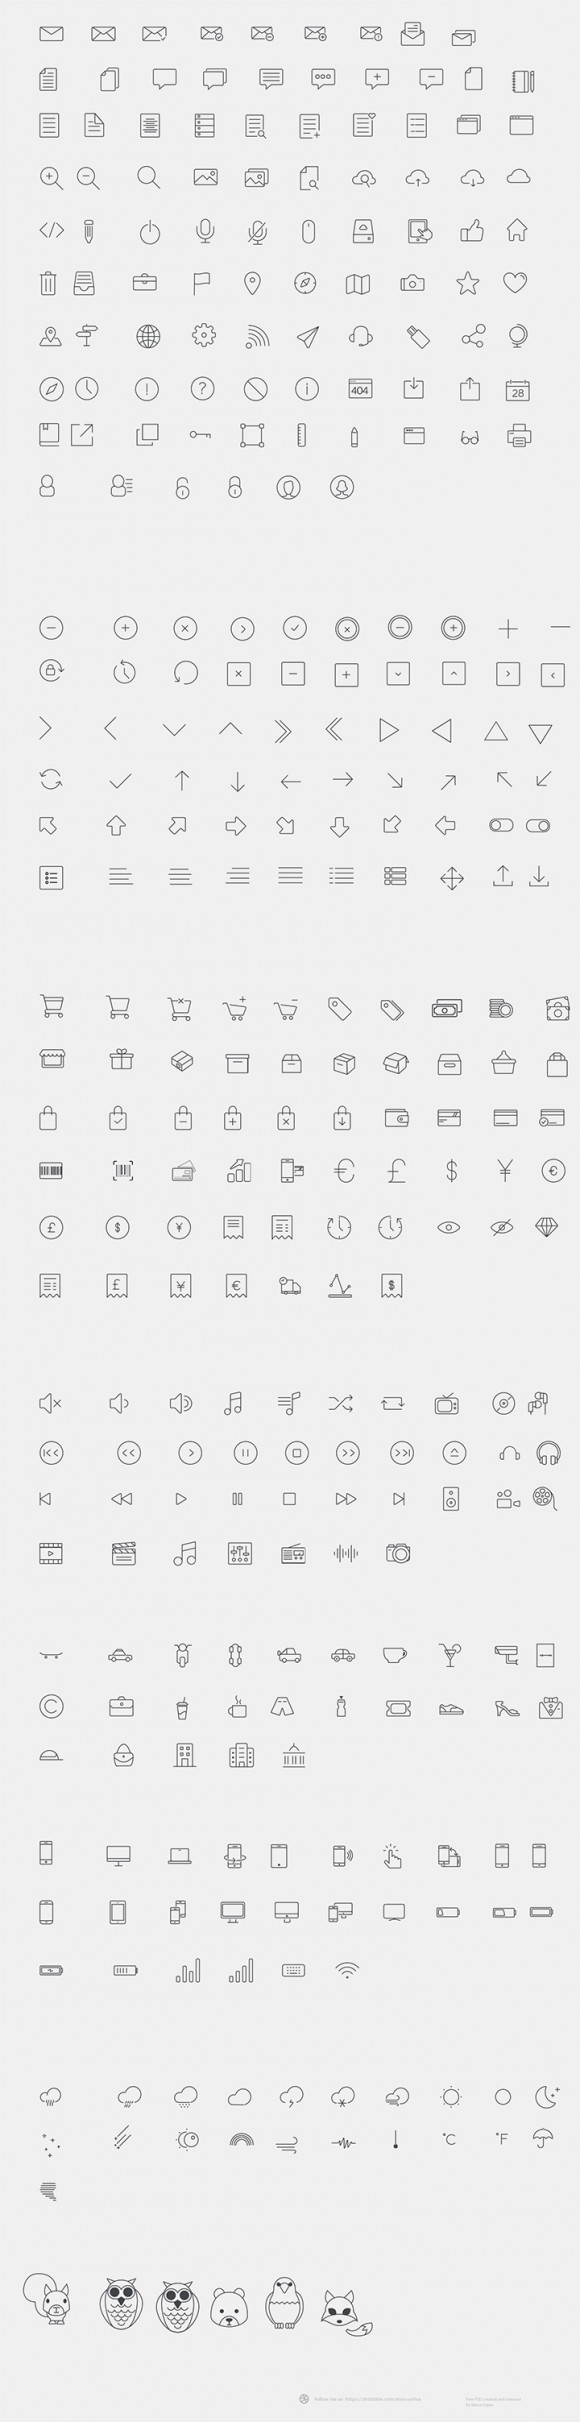 300+ line icons - Detailed image